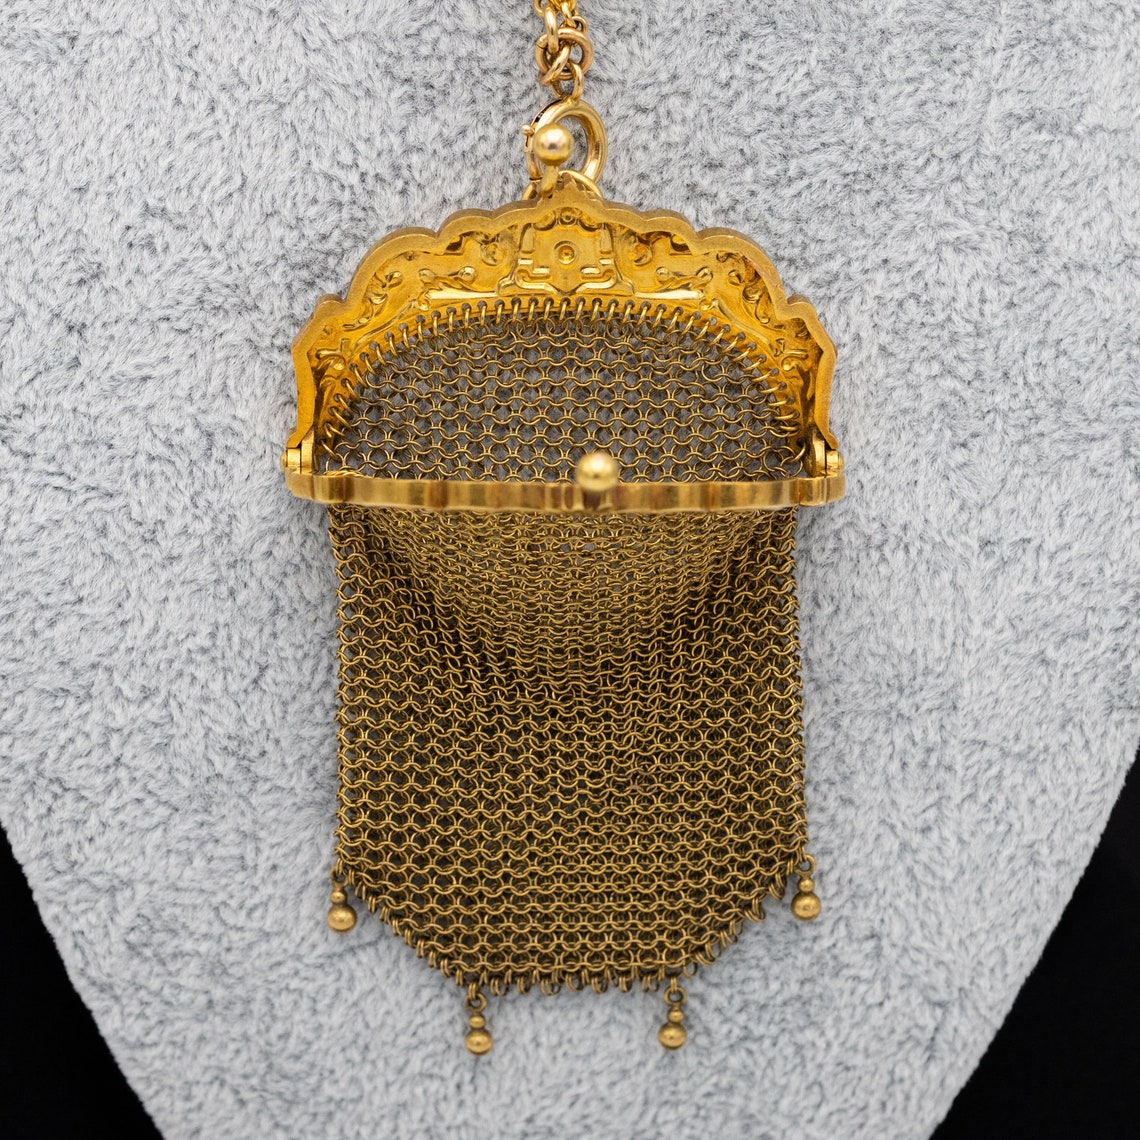 Antique Gold Mesh Purse Glamorous and Rare Purse Coin - Etsy